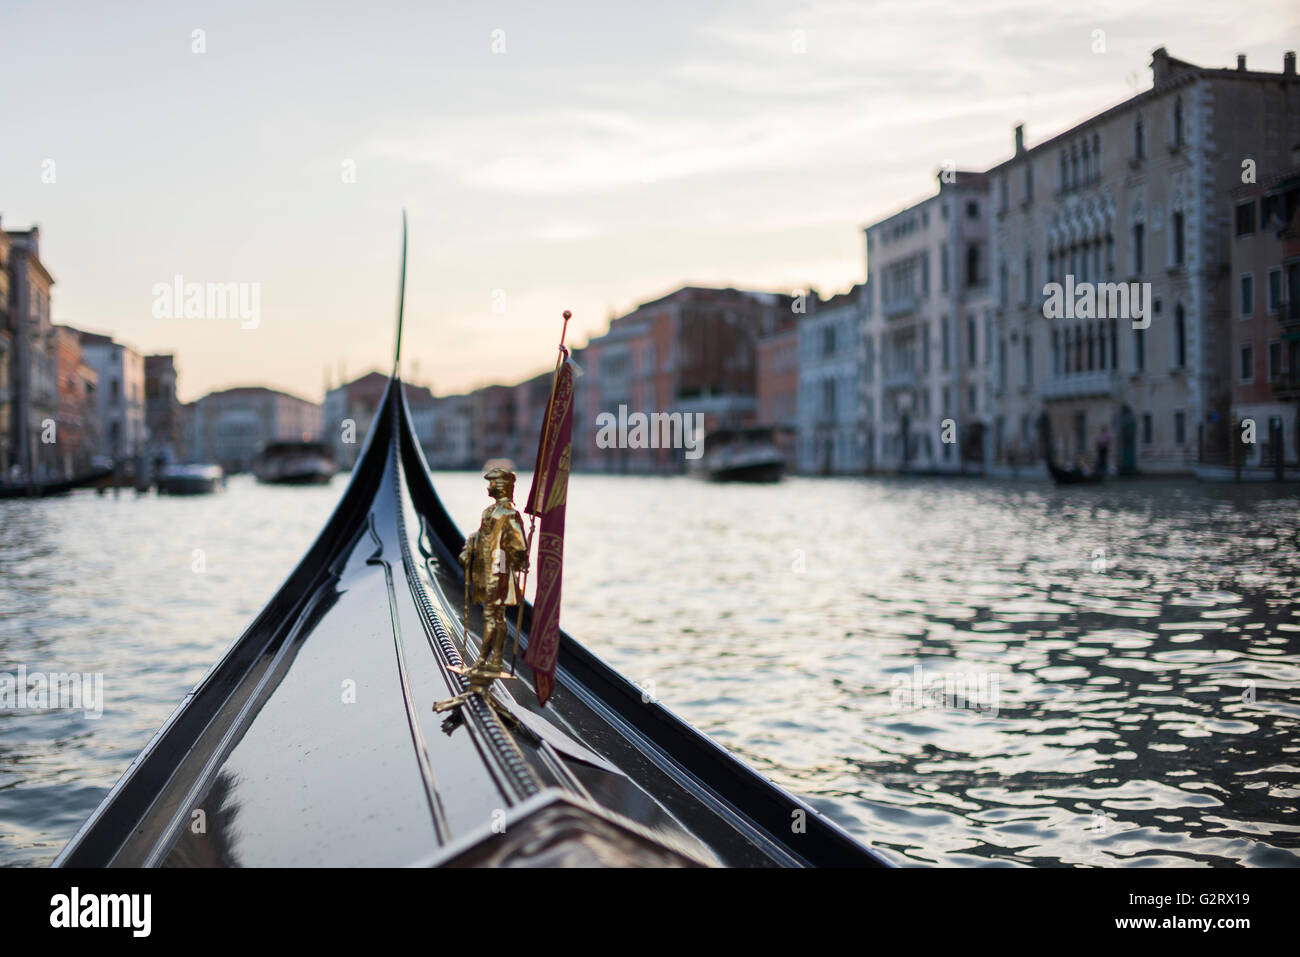 A close up of the miniature figure in front of the gondola with the city´s landscape behind, Venice, Italy. Stock Photo